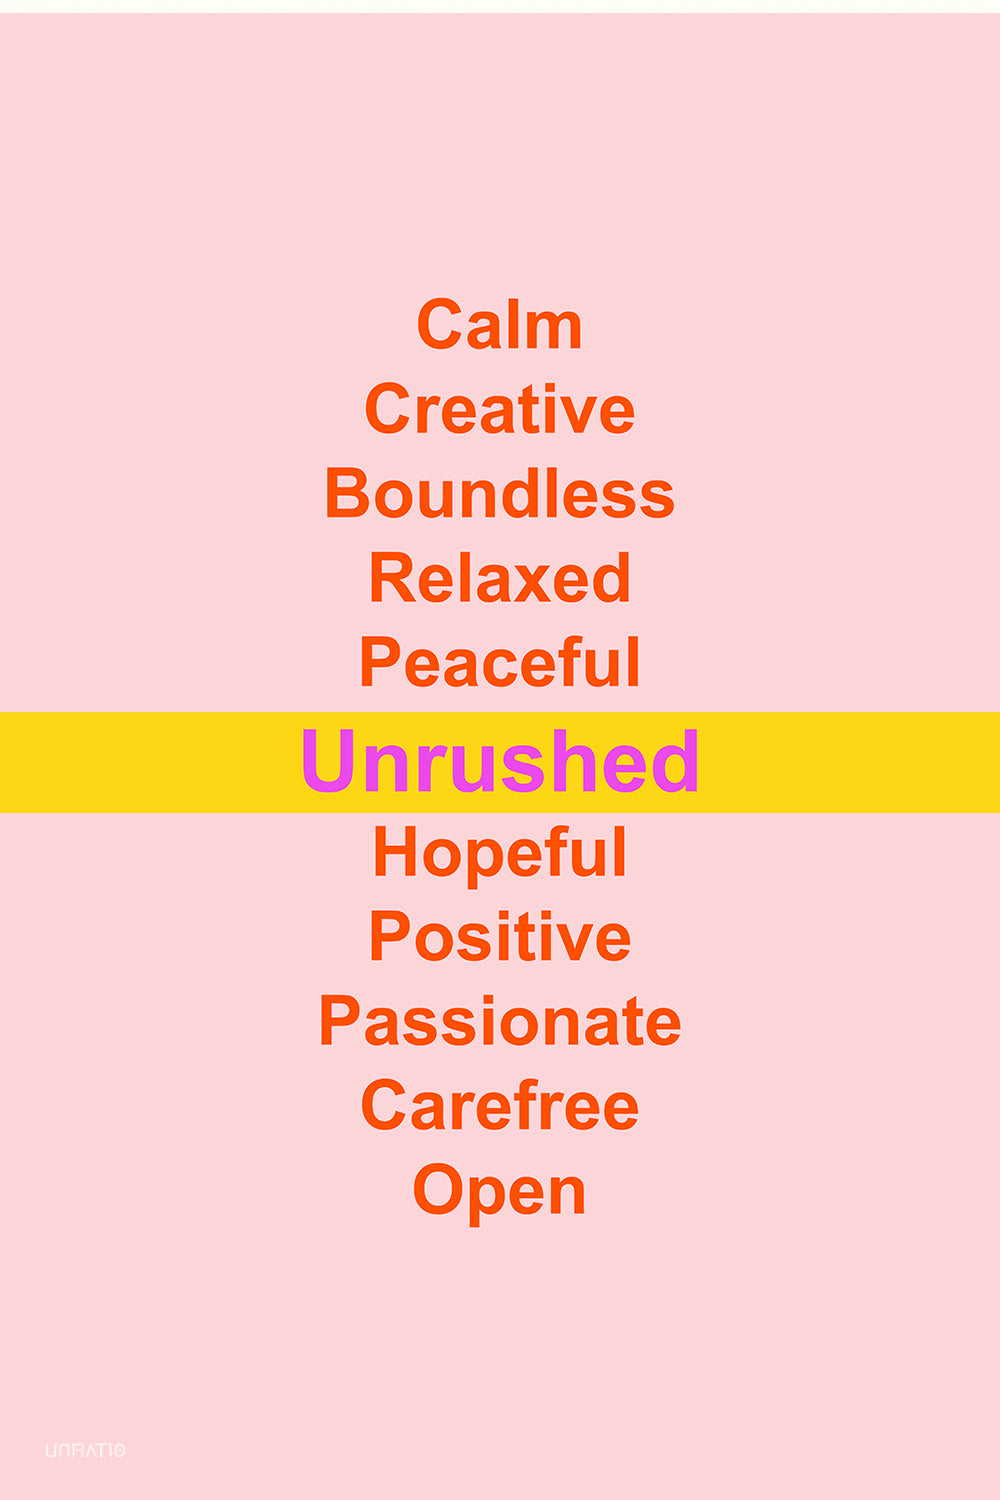 Typography art of positive affirmations like 'Calm', 'Creative', 'Unrushed', 'Hopeful', on a soft pink background for an uplifting blog post.